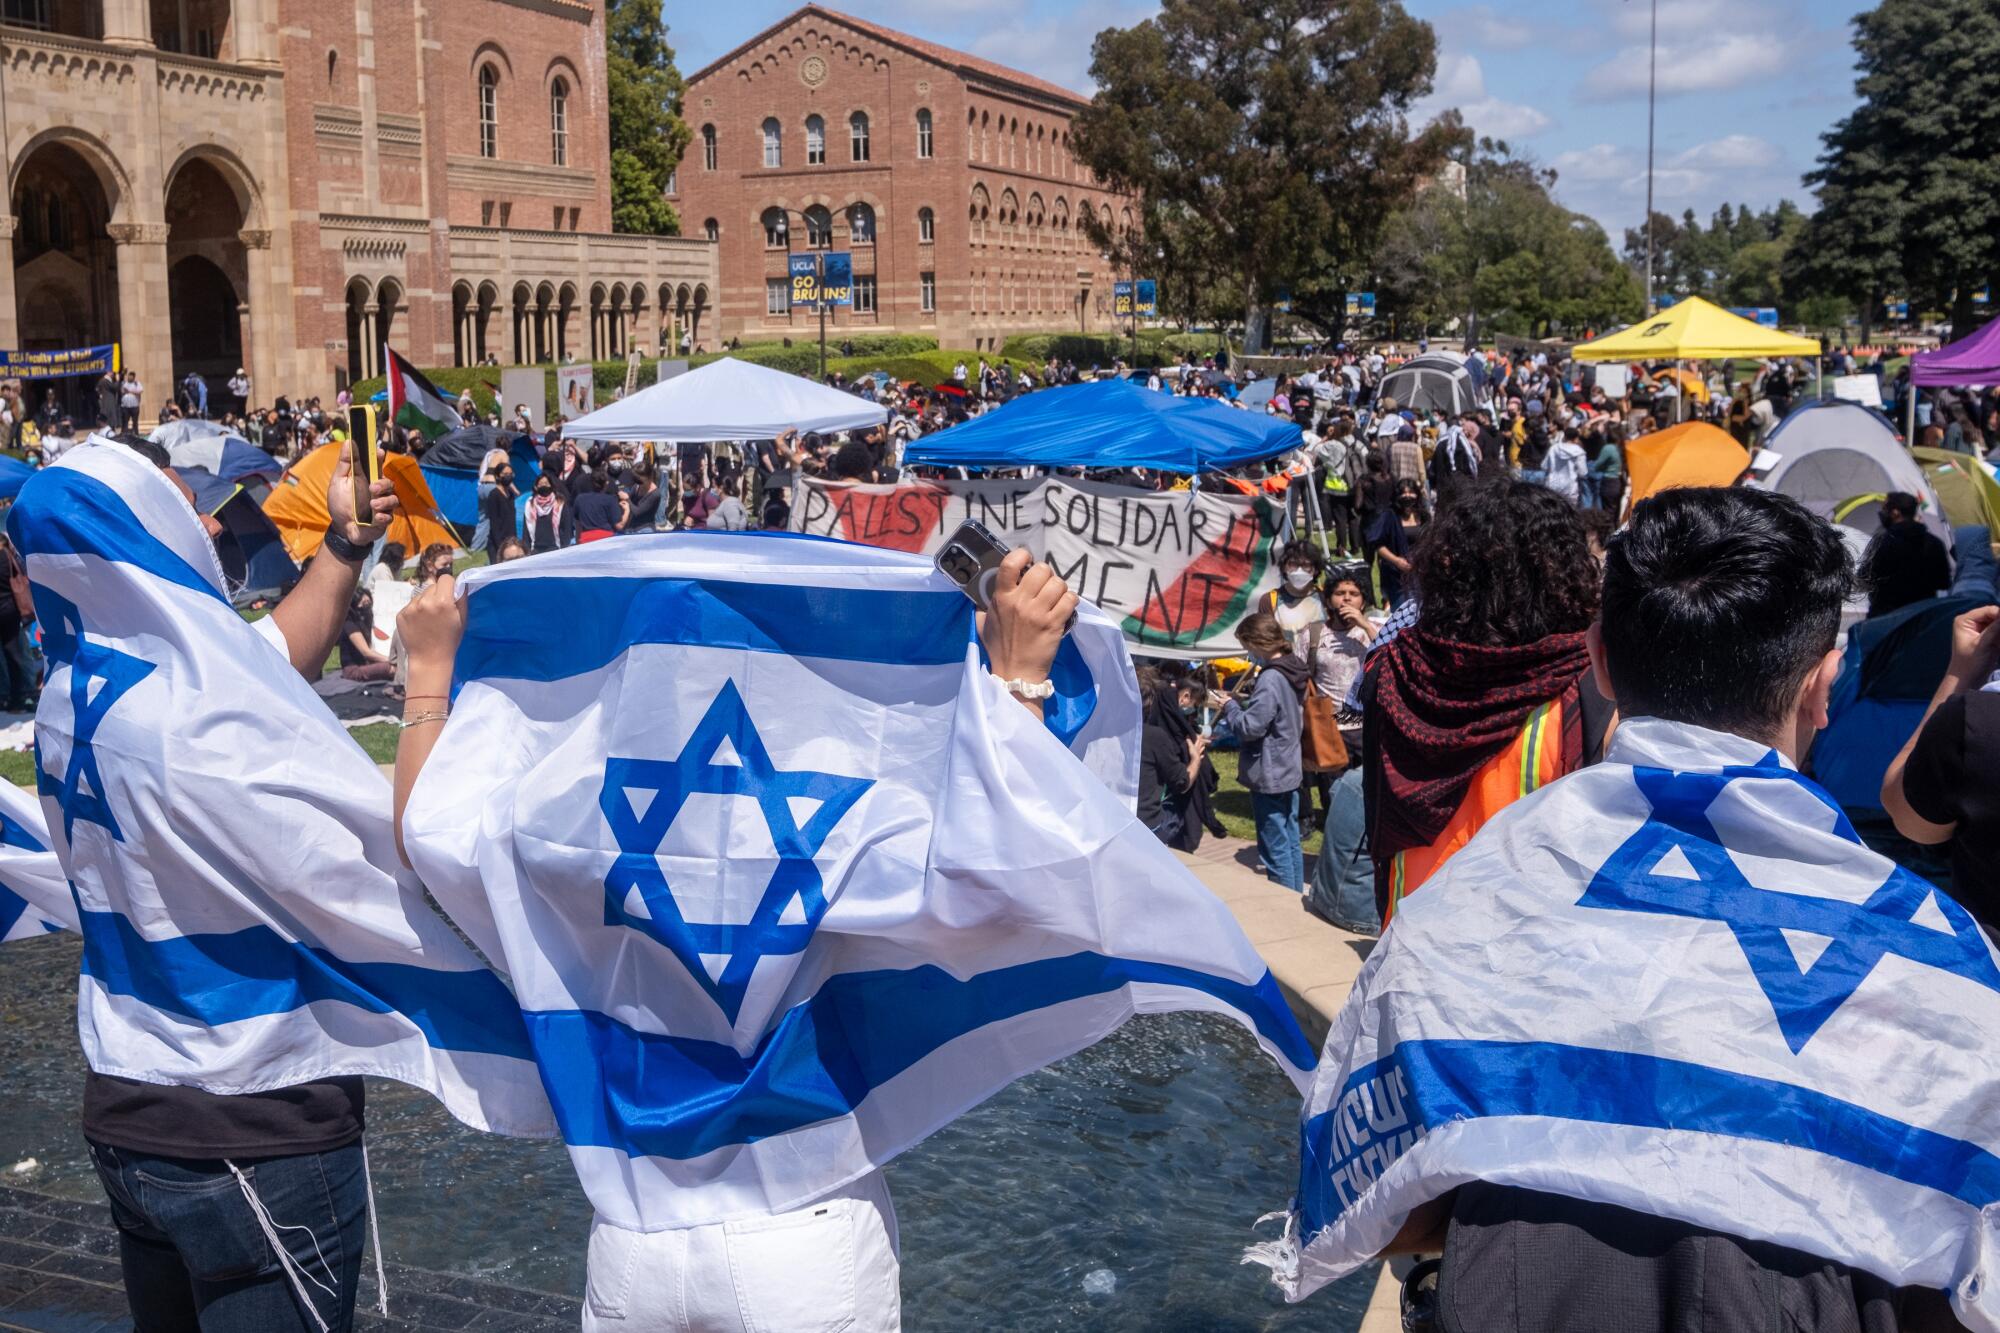 Pro-Israeli demonstrators gather near an encampment set up by pro-Palestine protesters on the campus of UCLA on April 25.